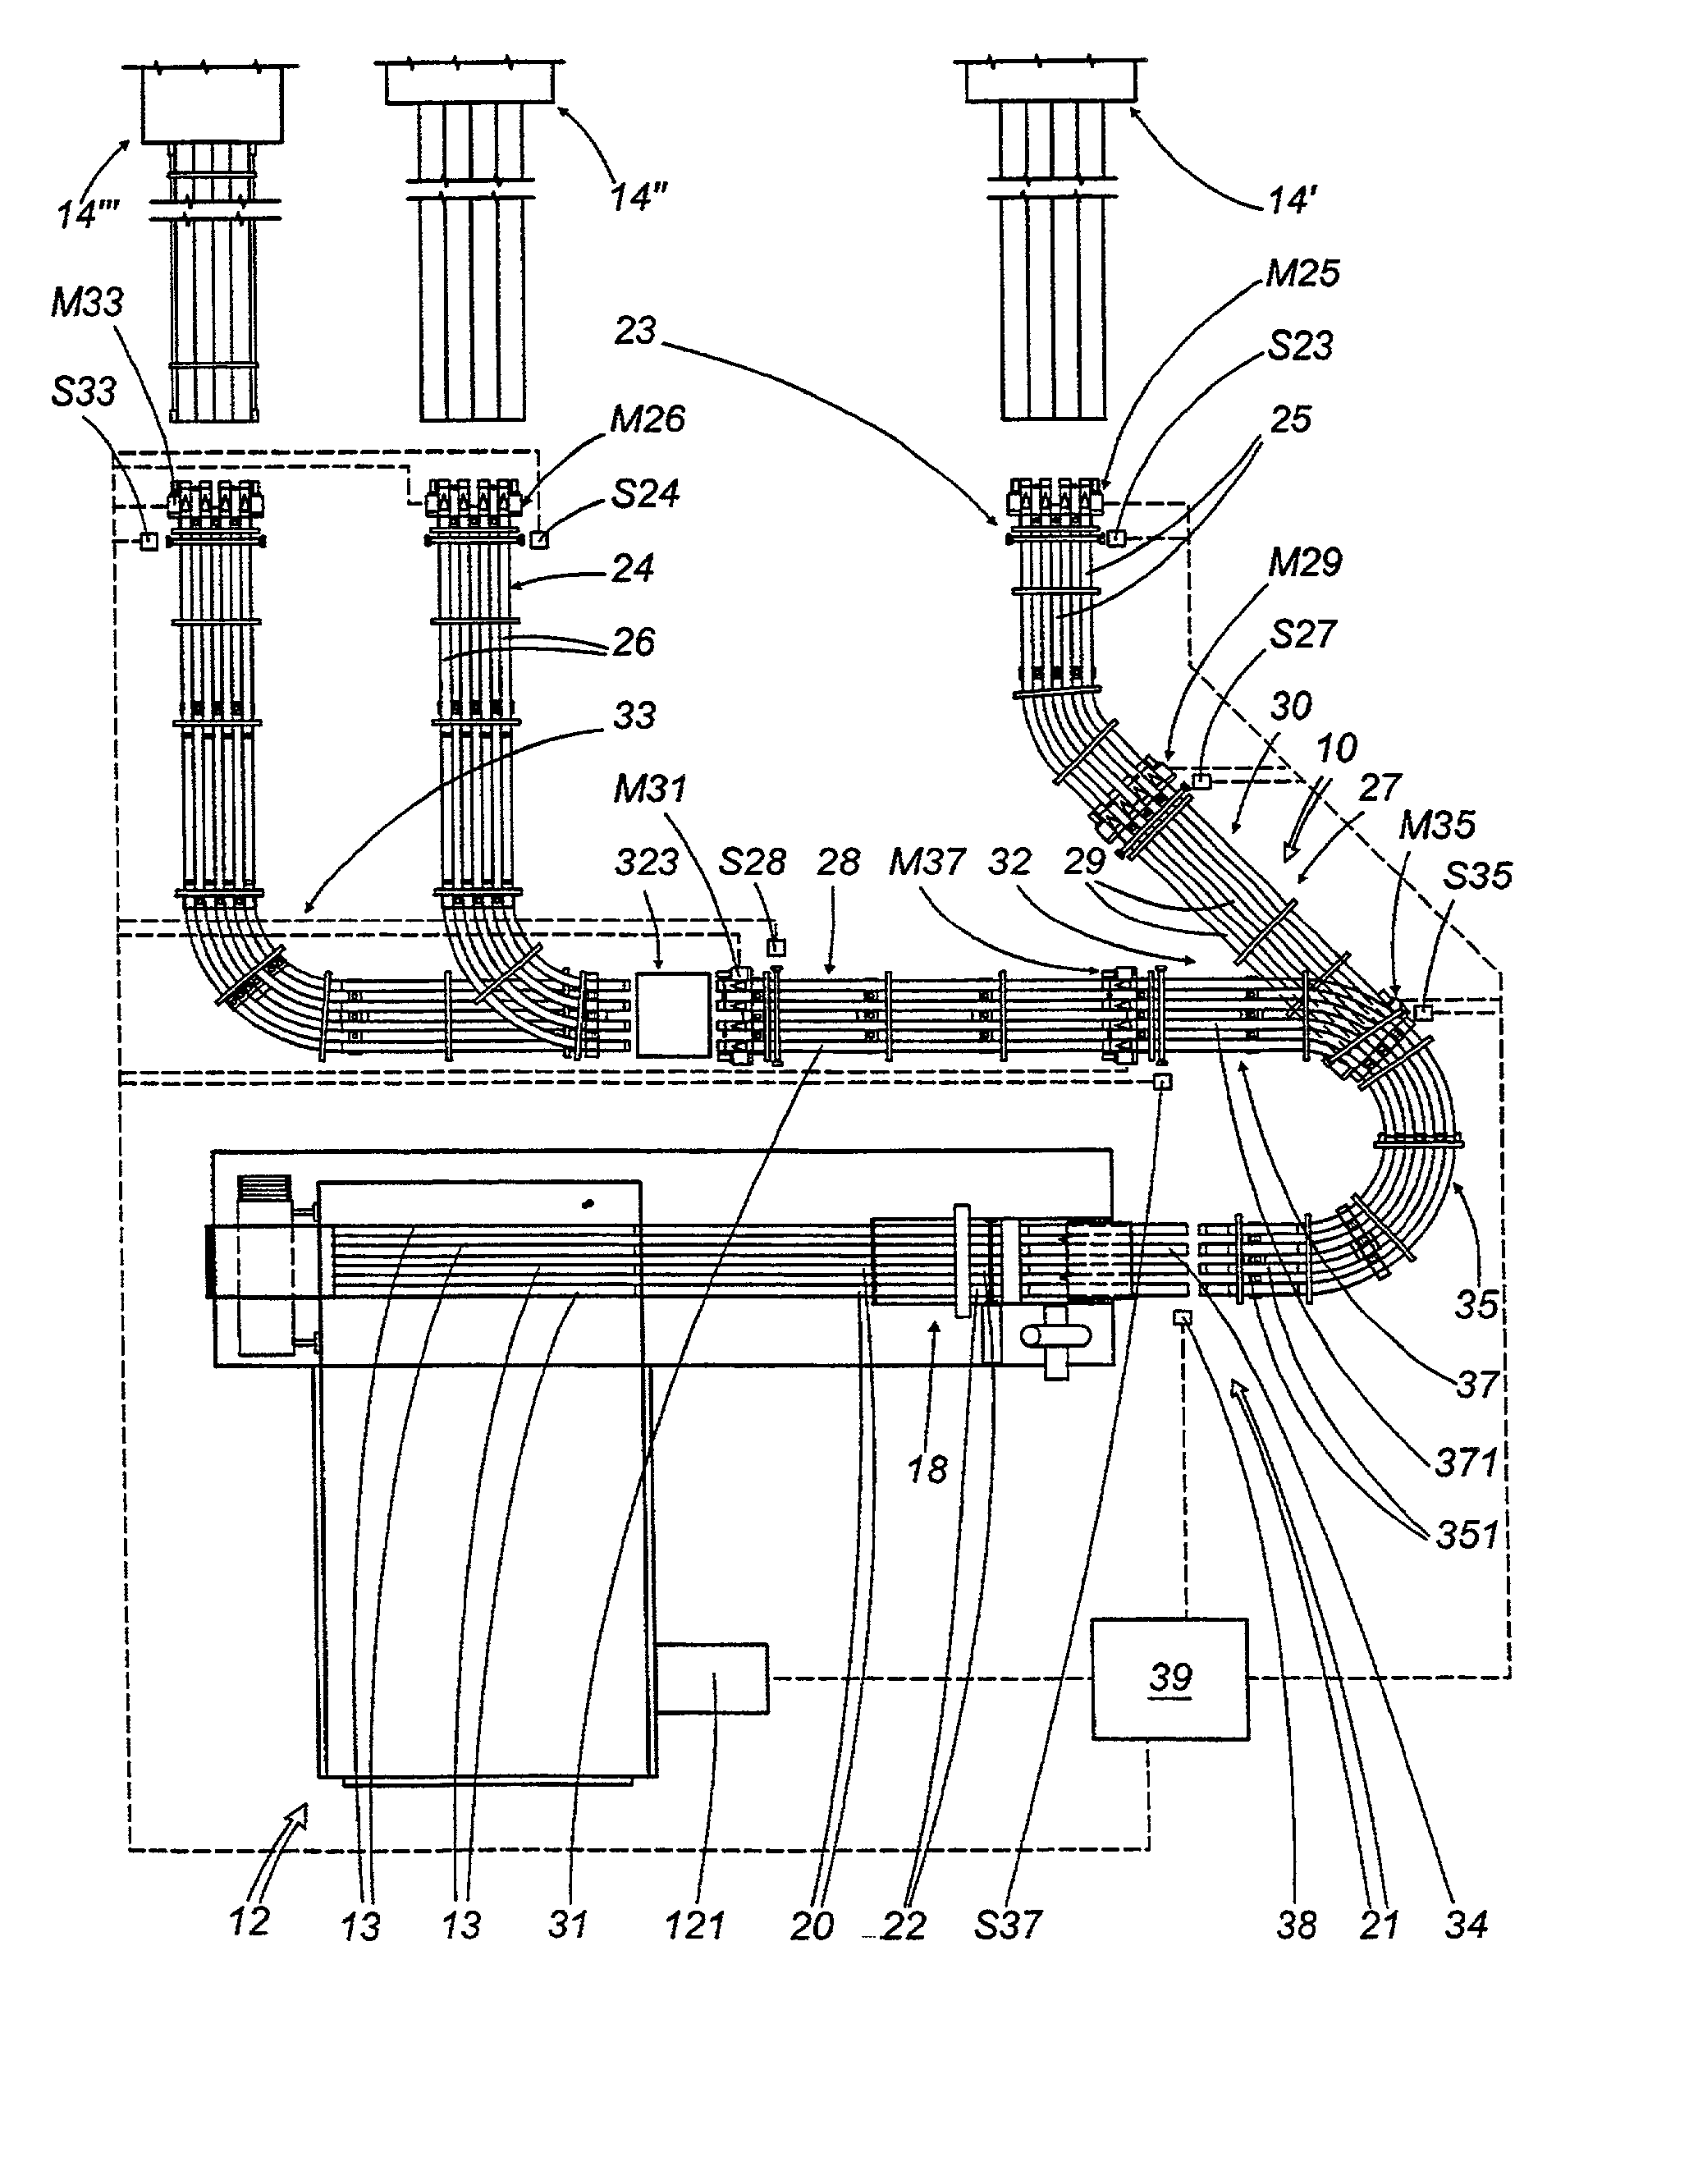 Apparatus and method for conveying items